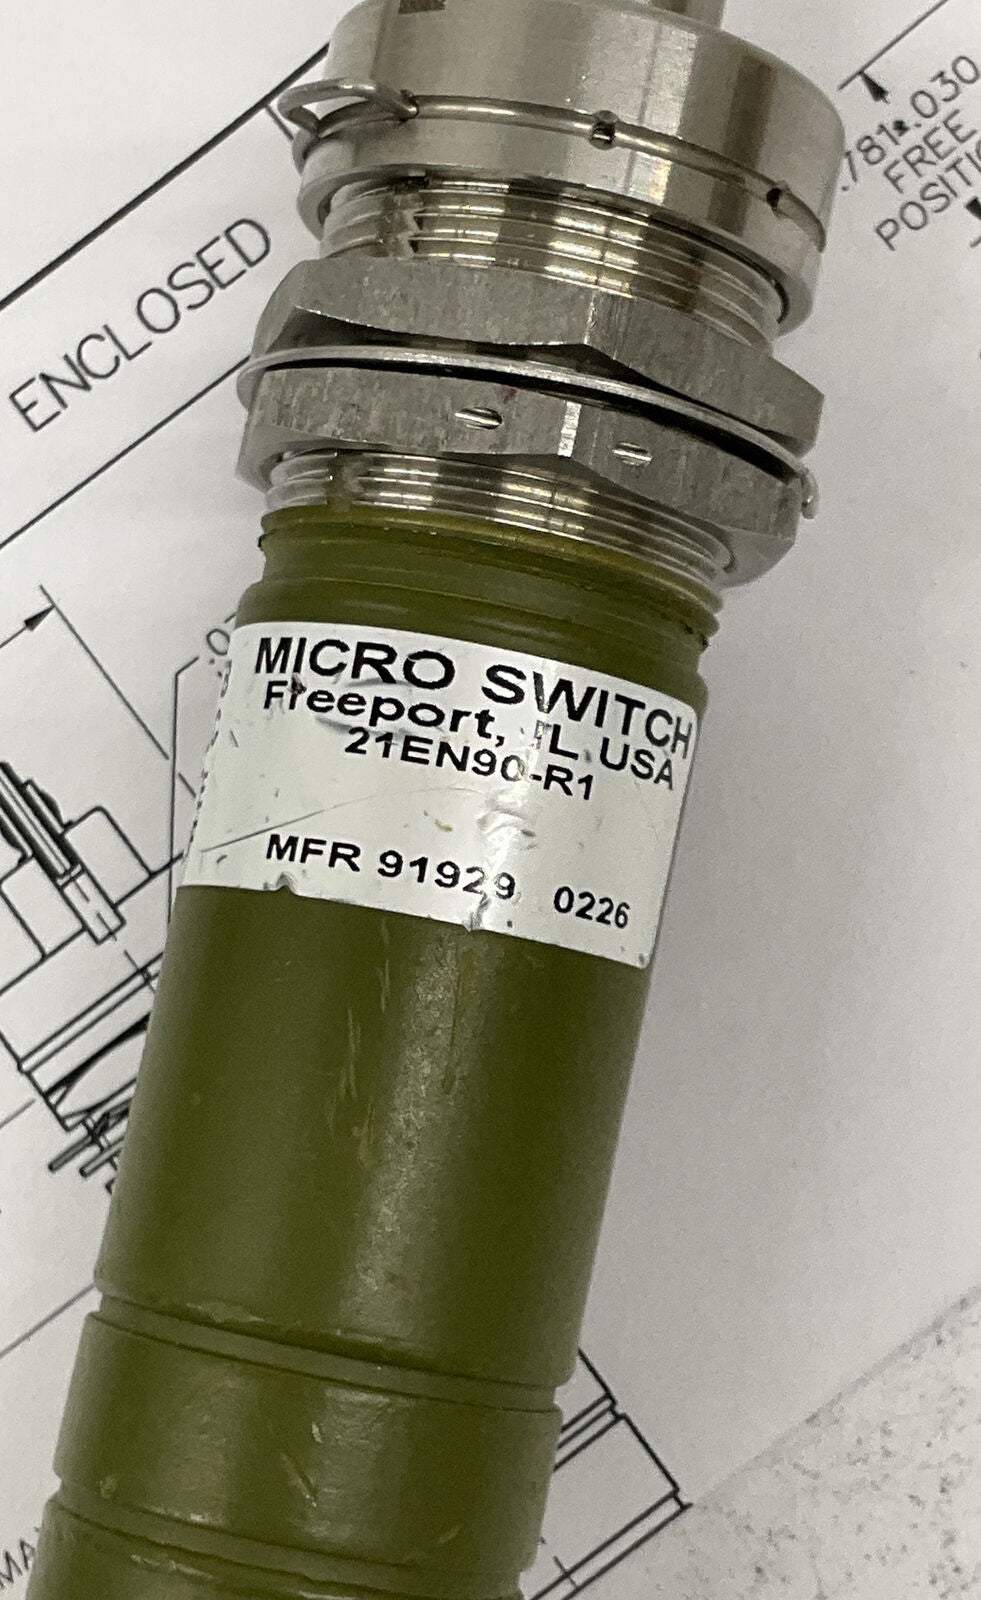 Micro-Switch / Honeywell 21EN90-R1 New Roller Limit Switch DPDT 2NO-2NC (YE156) - 0